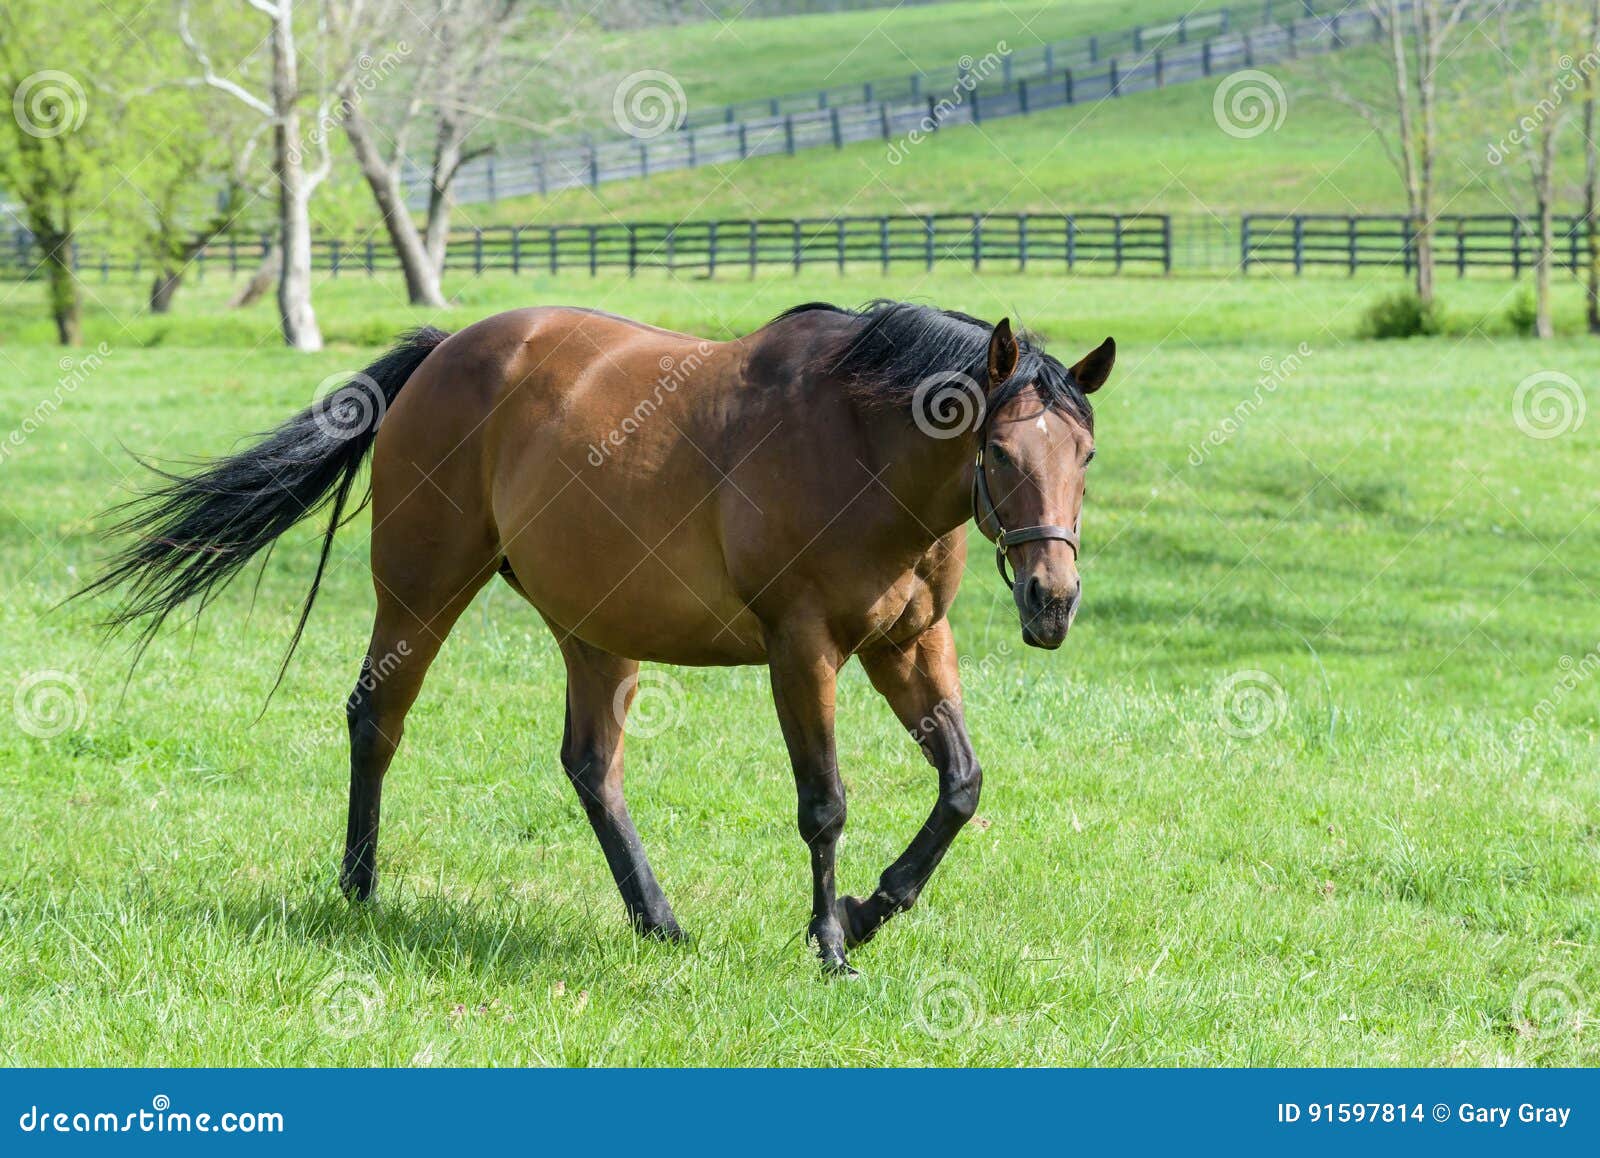 thoroughbred mare in a bluegrass pasture